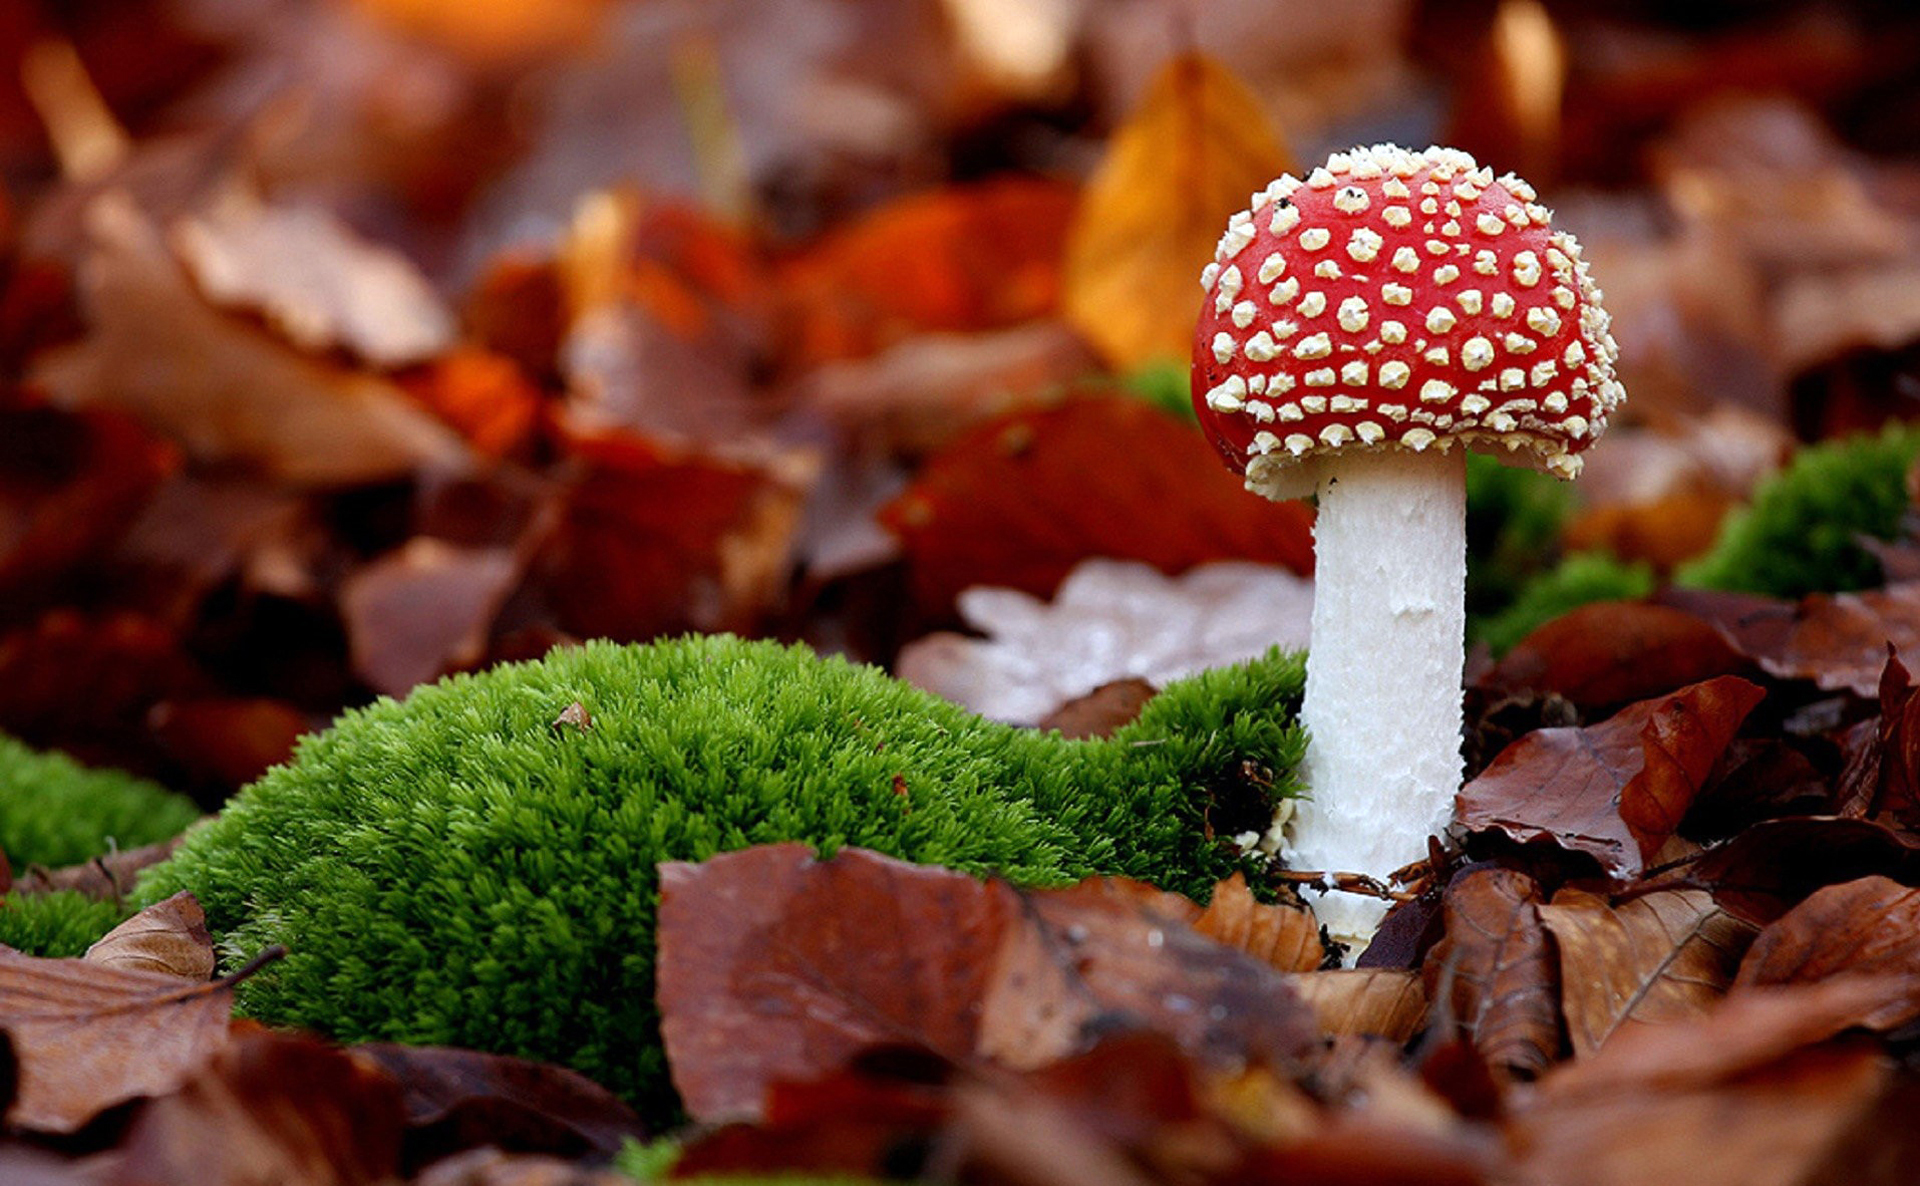 Wallpapers fly agaric mushroom forest on the desktop